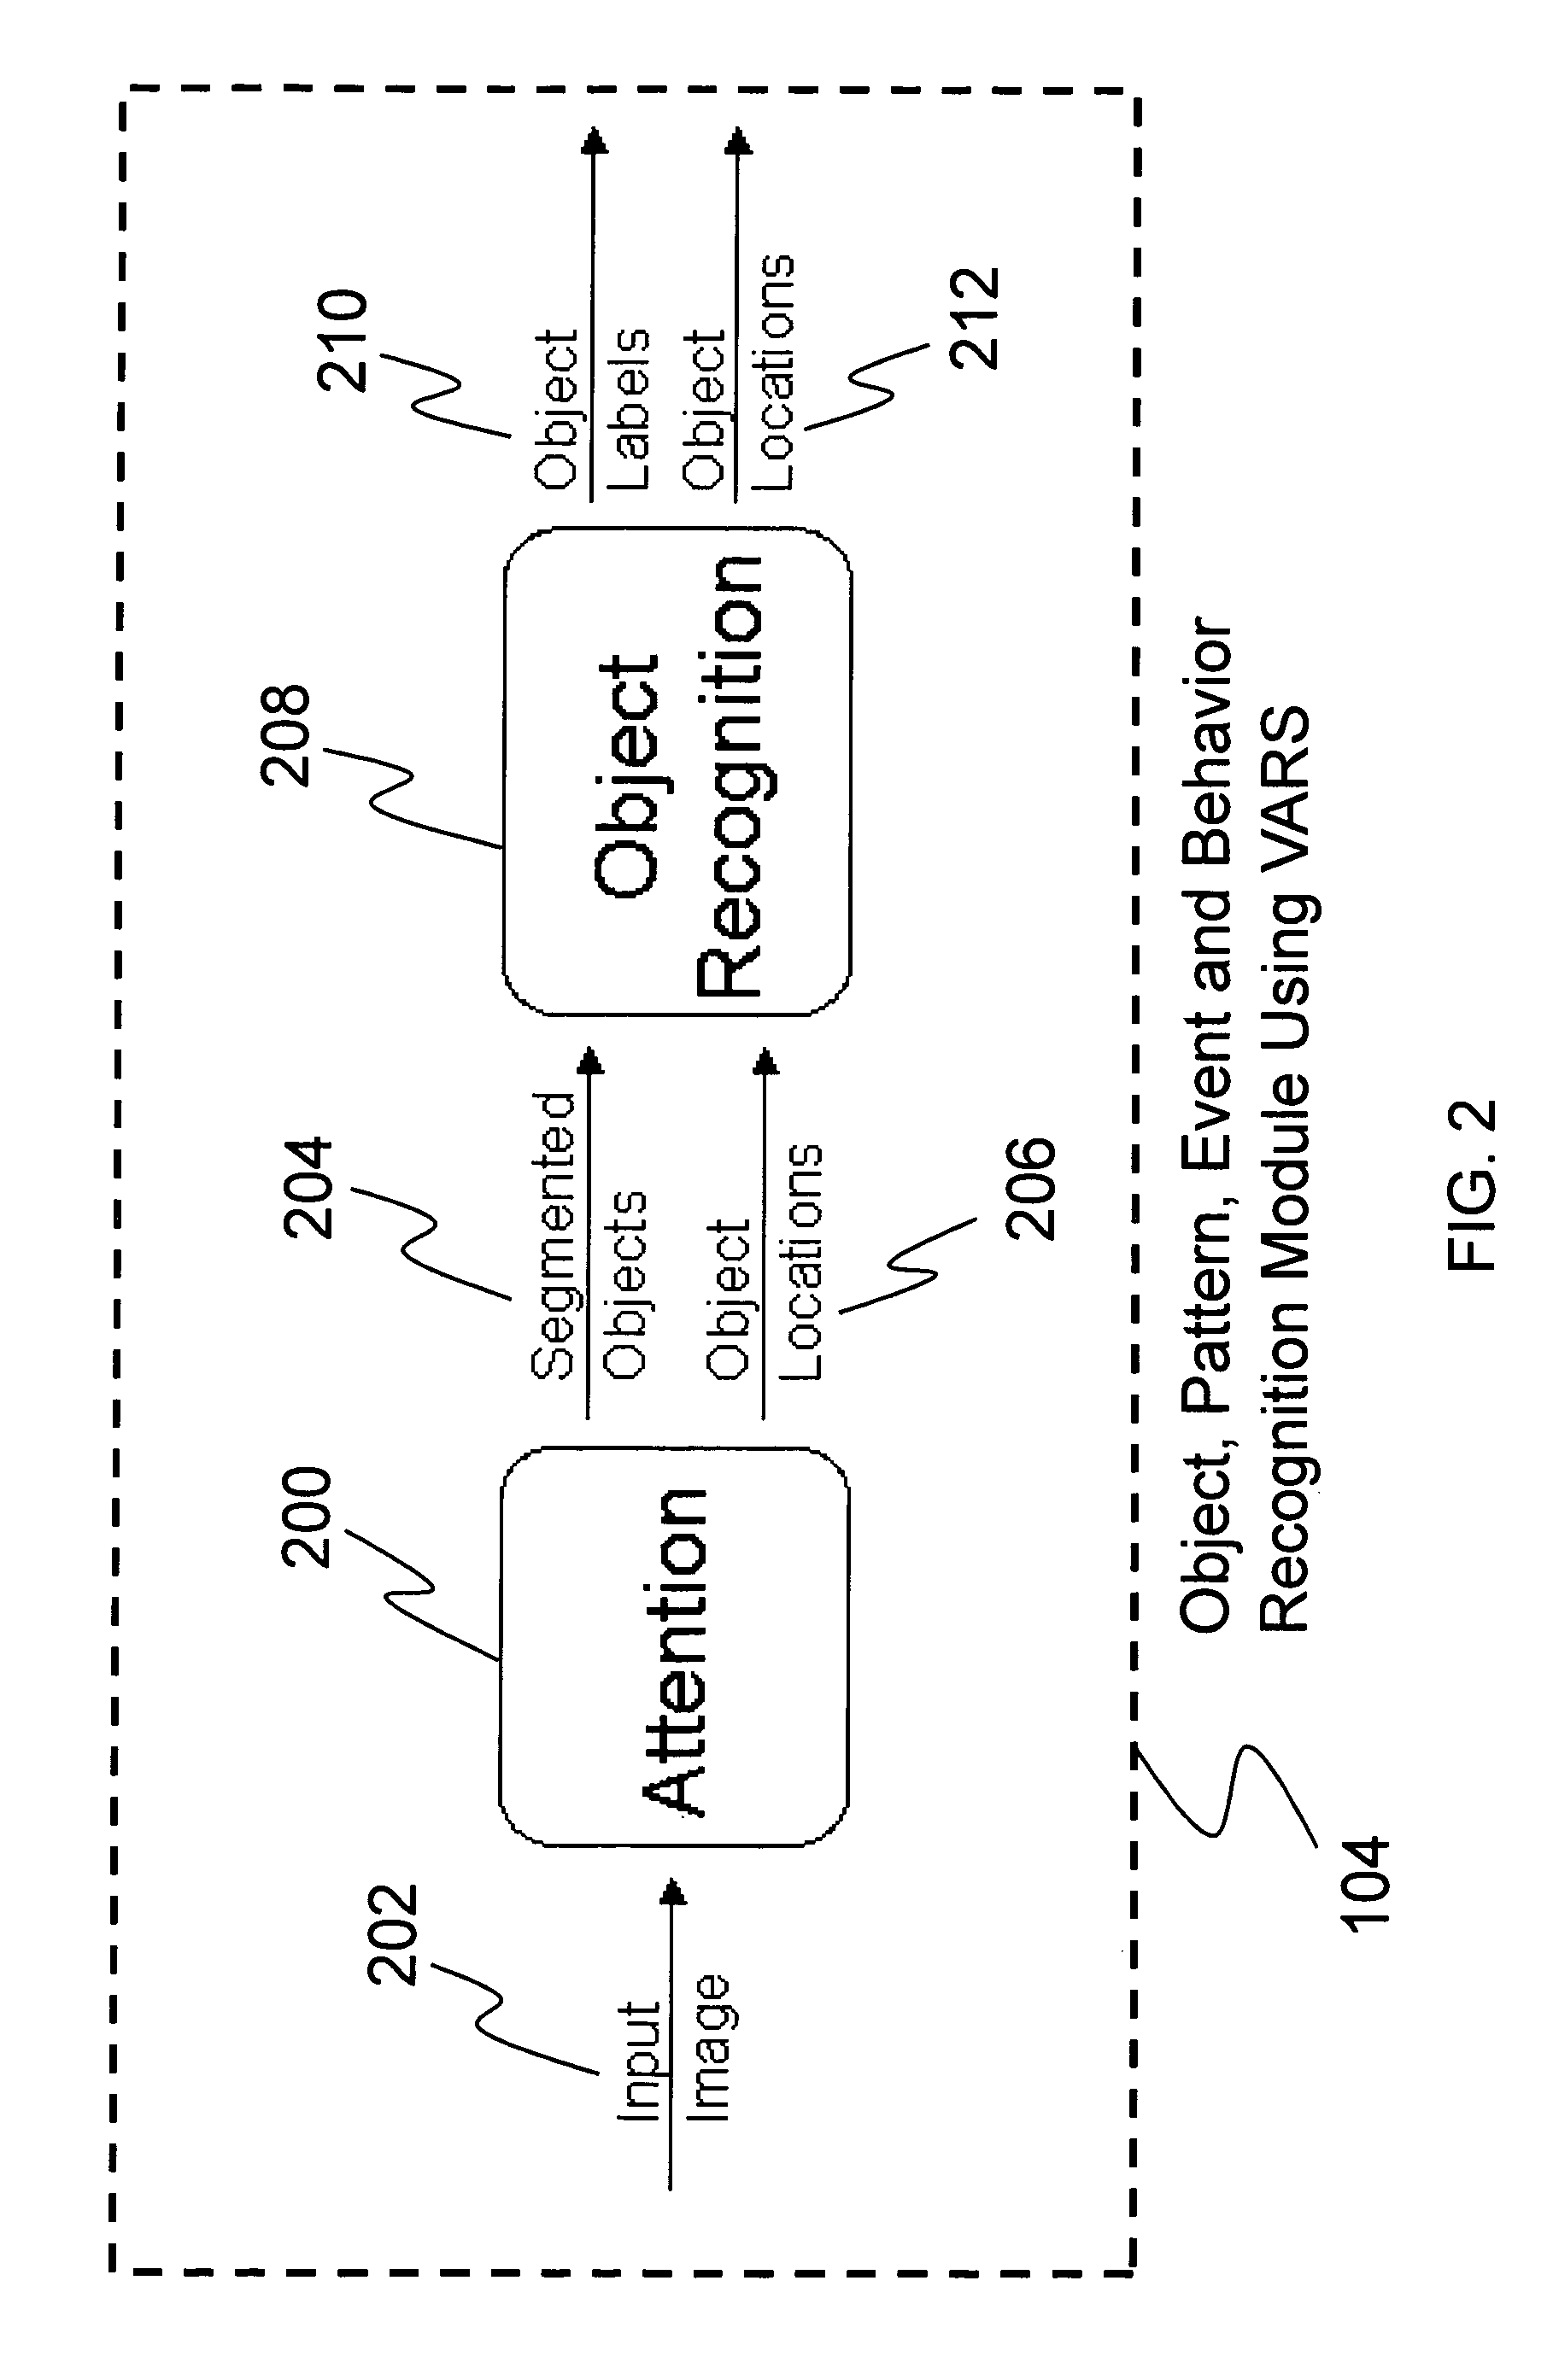 Bio-inspired actionable intelligence method and system